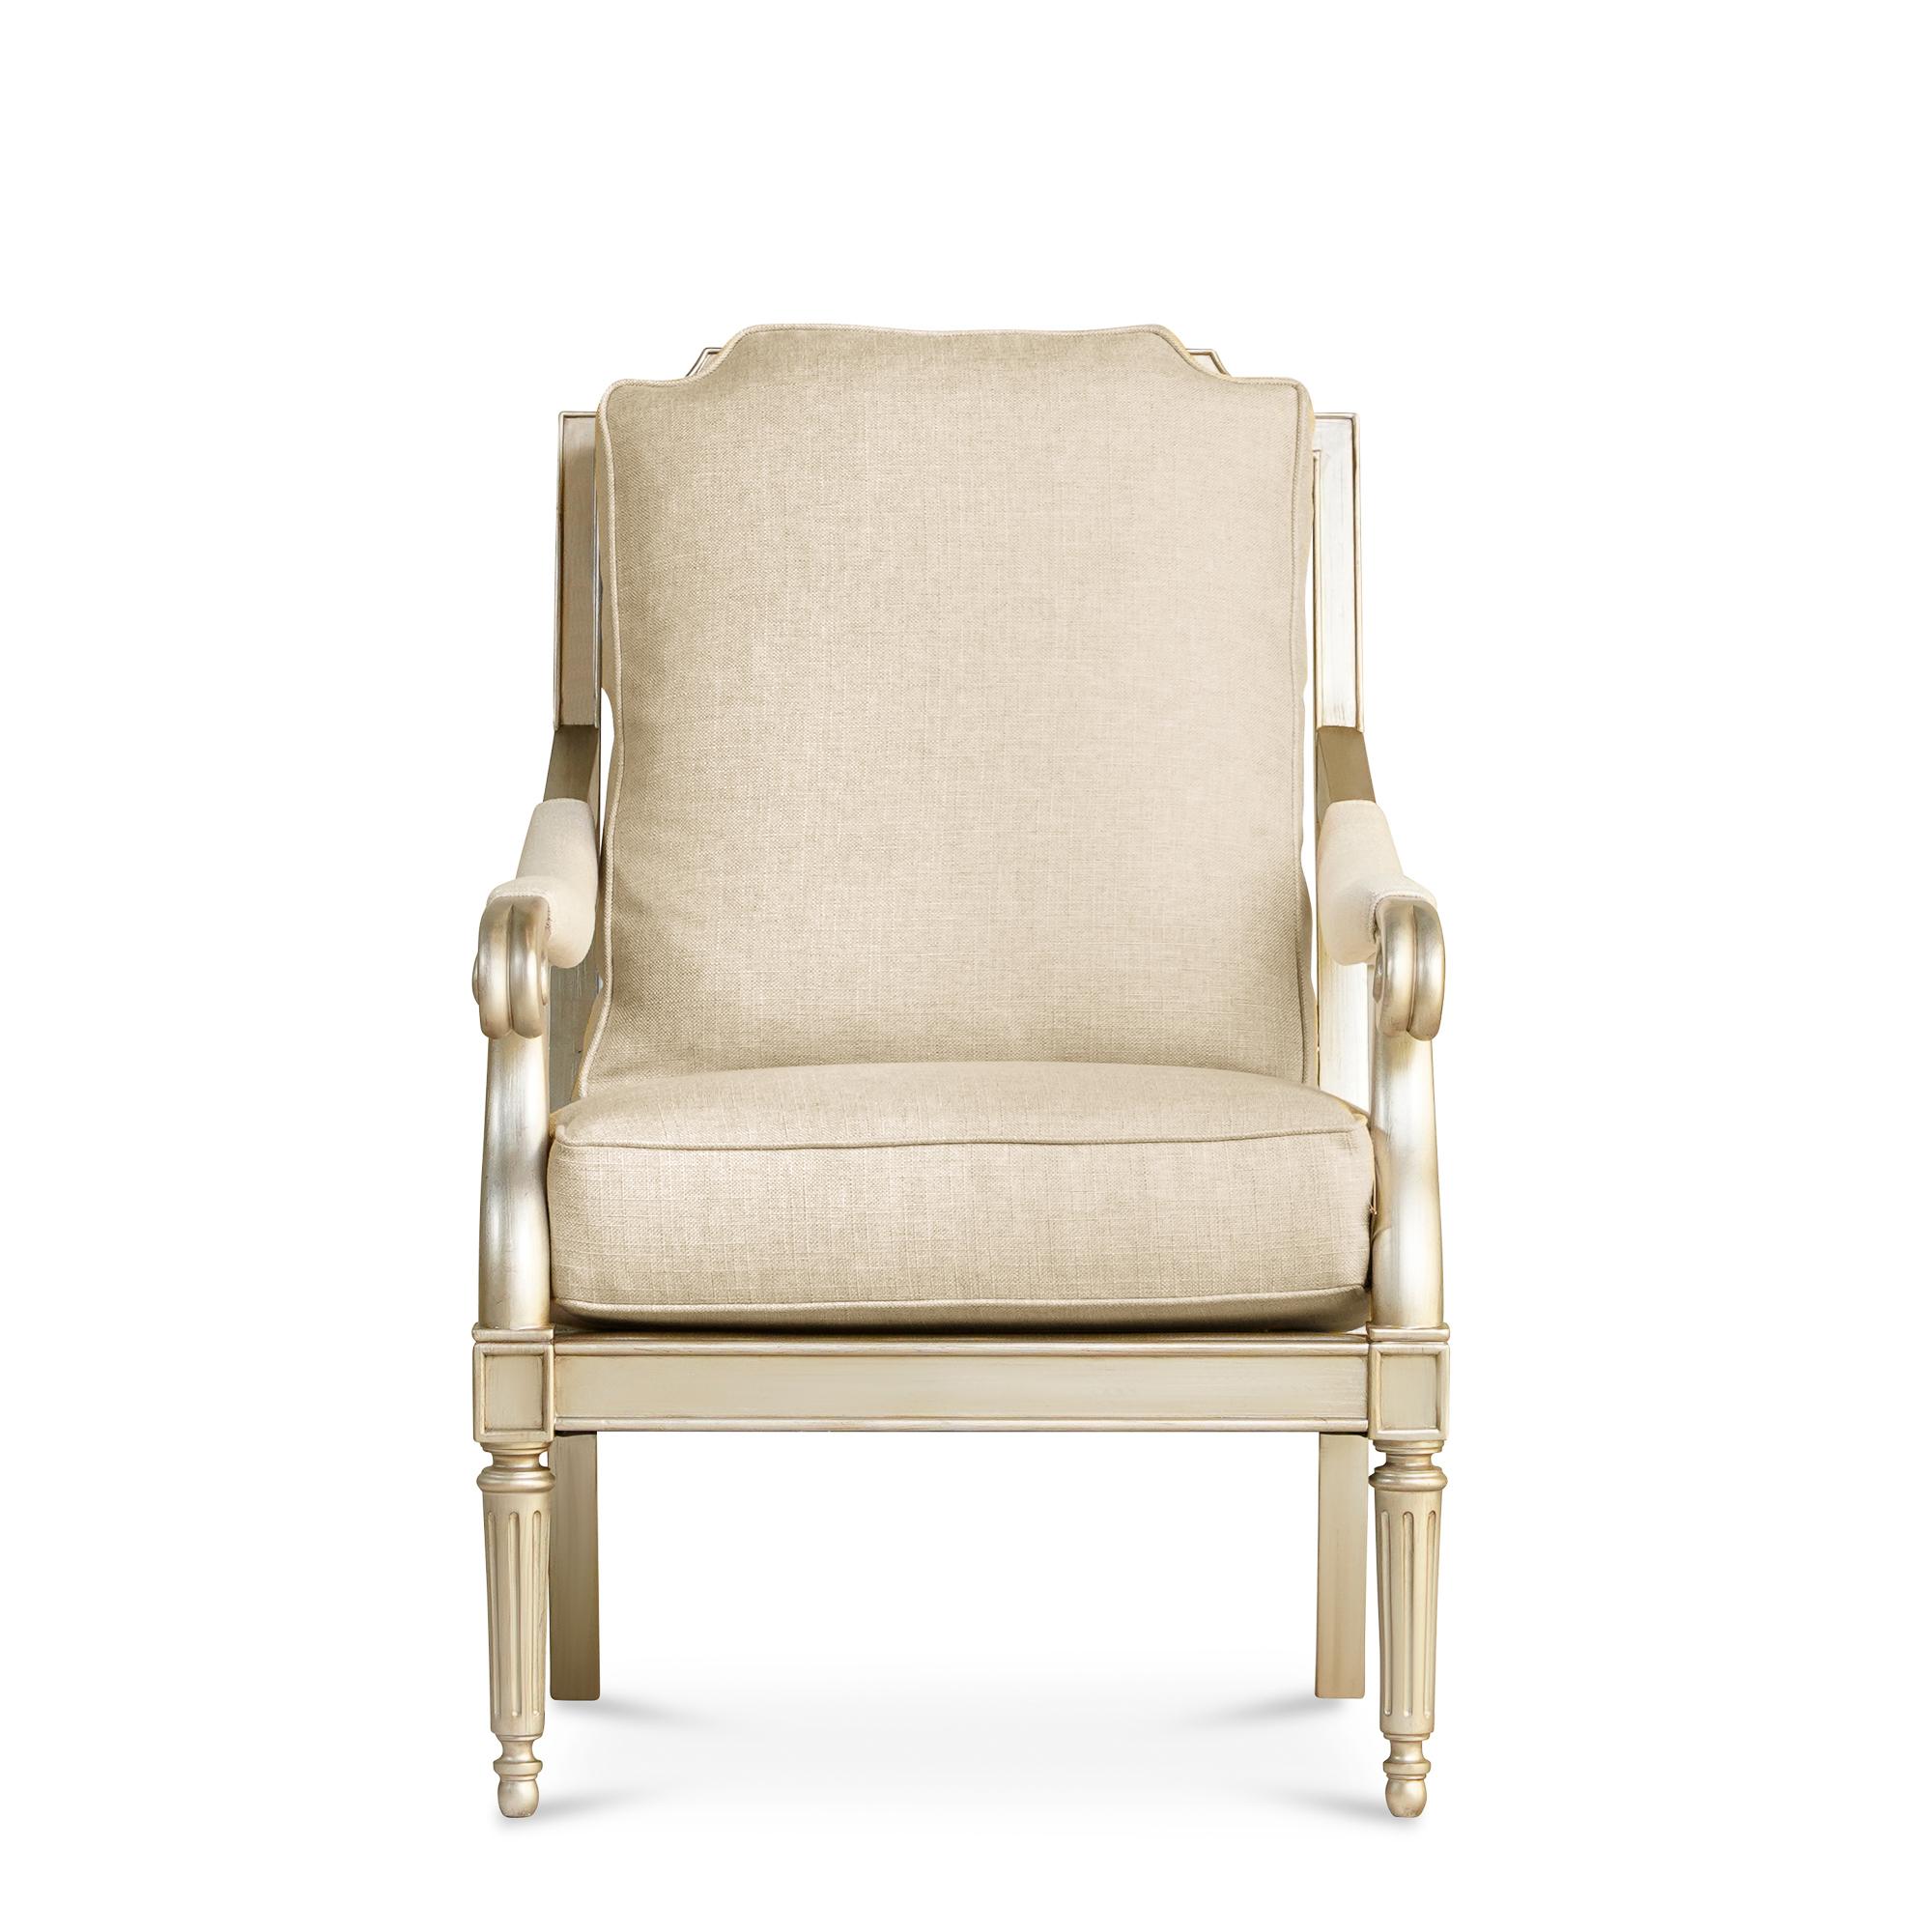 Contemporary, Modern Arm Chairs Charlotte Emerald 176574-5227AA in Beige Fabric